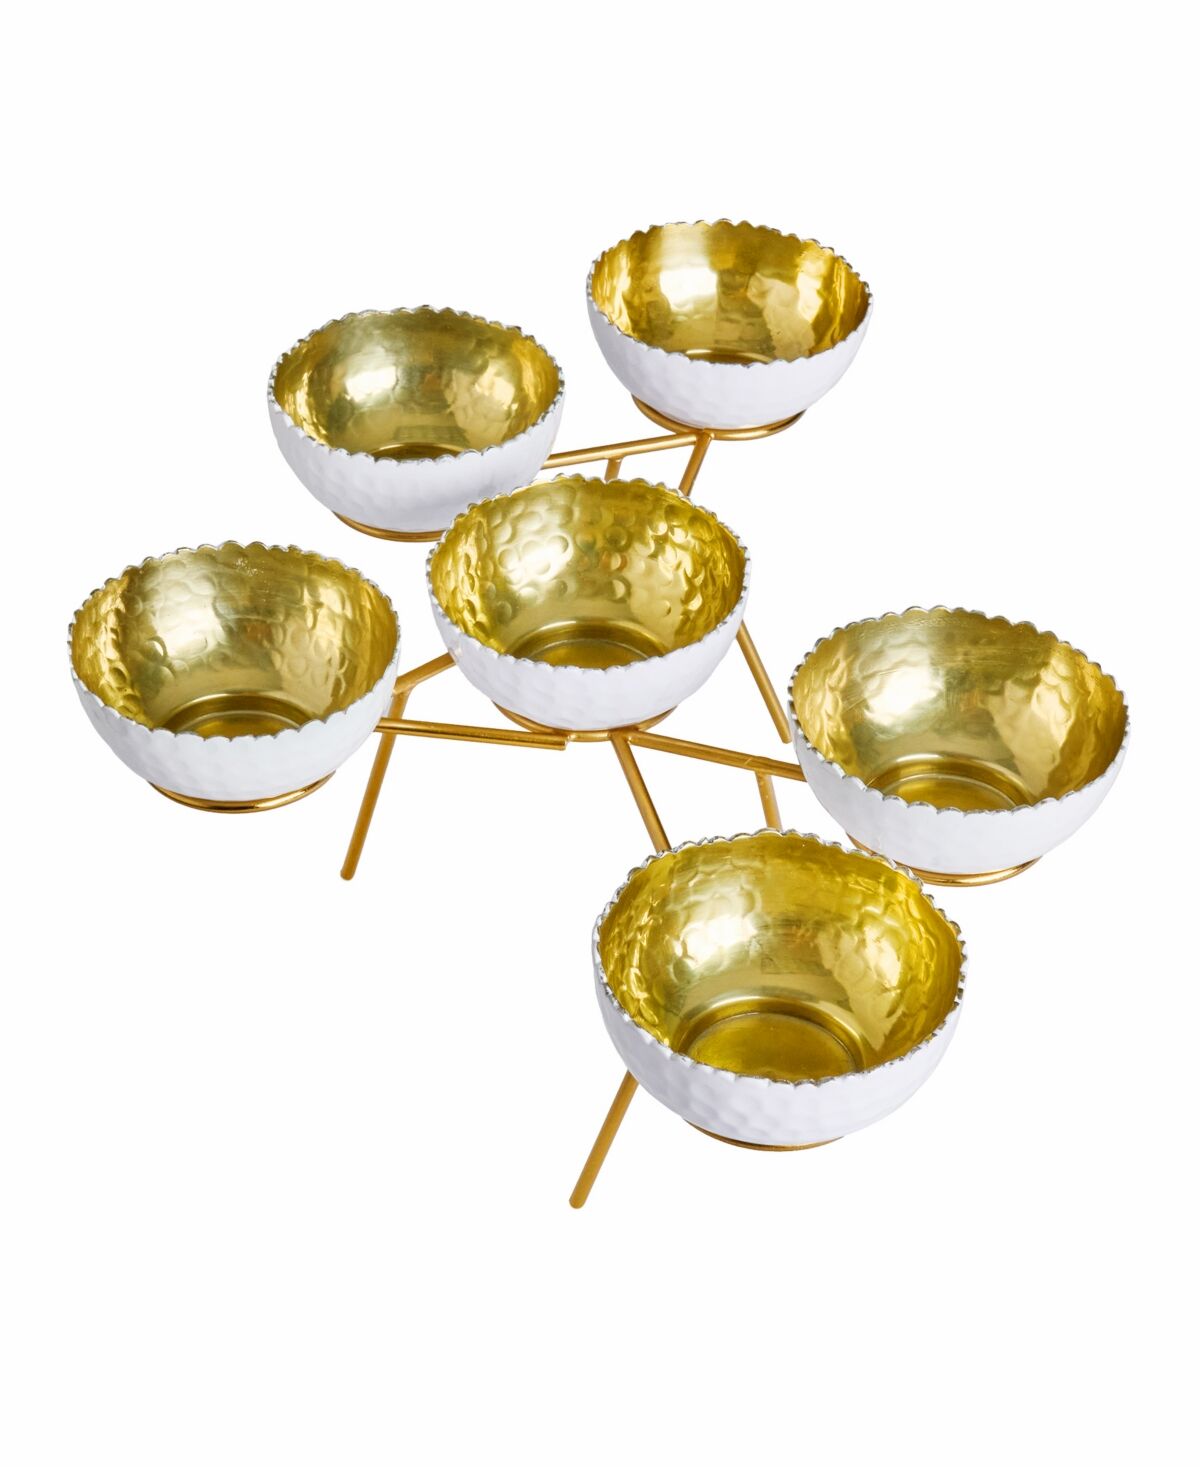 Godinger Signature Collection by Godinger Enamel Gold-Tone Stainless Bowls on Stand - White